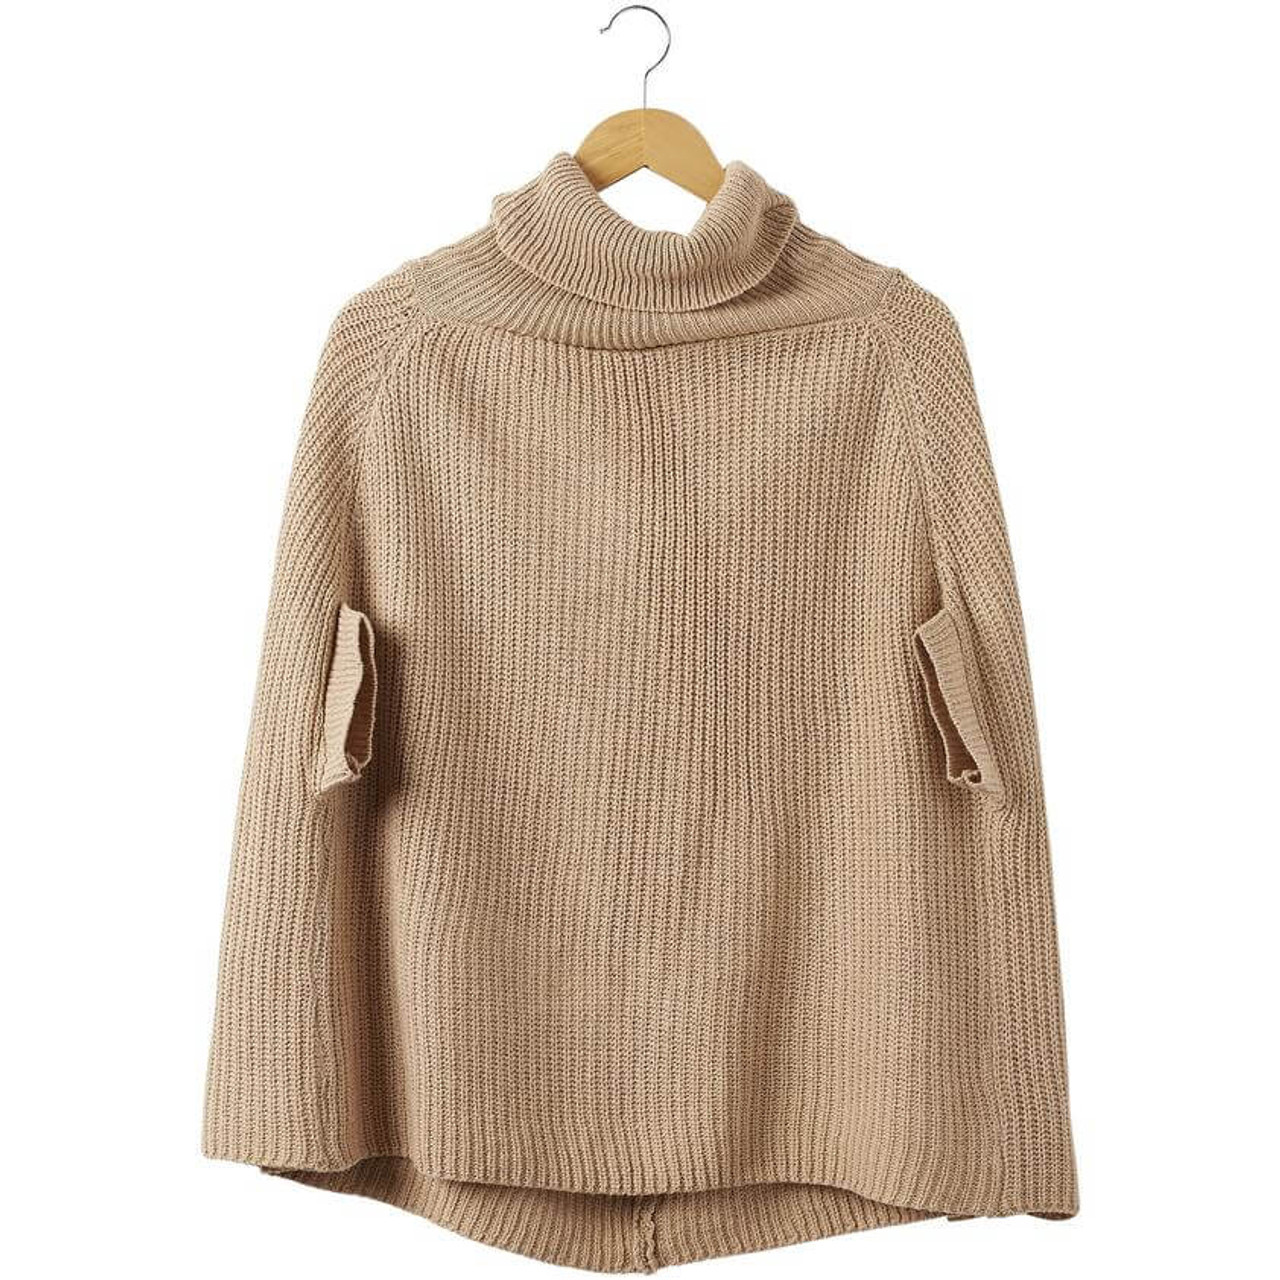 This modern sweater knit khaki Victoria poncho is perfect for the office, a day of shopping, or even date night. The neutral color and effortless style will have you looking chic and feeling warm wherever you go. One size fits most.